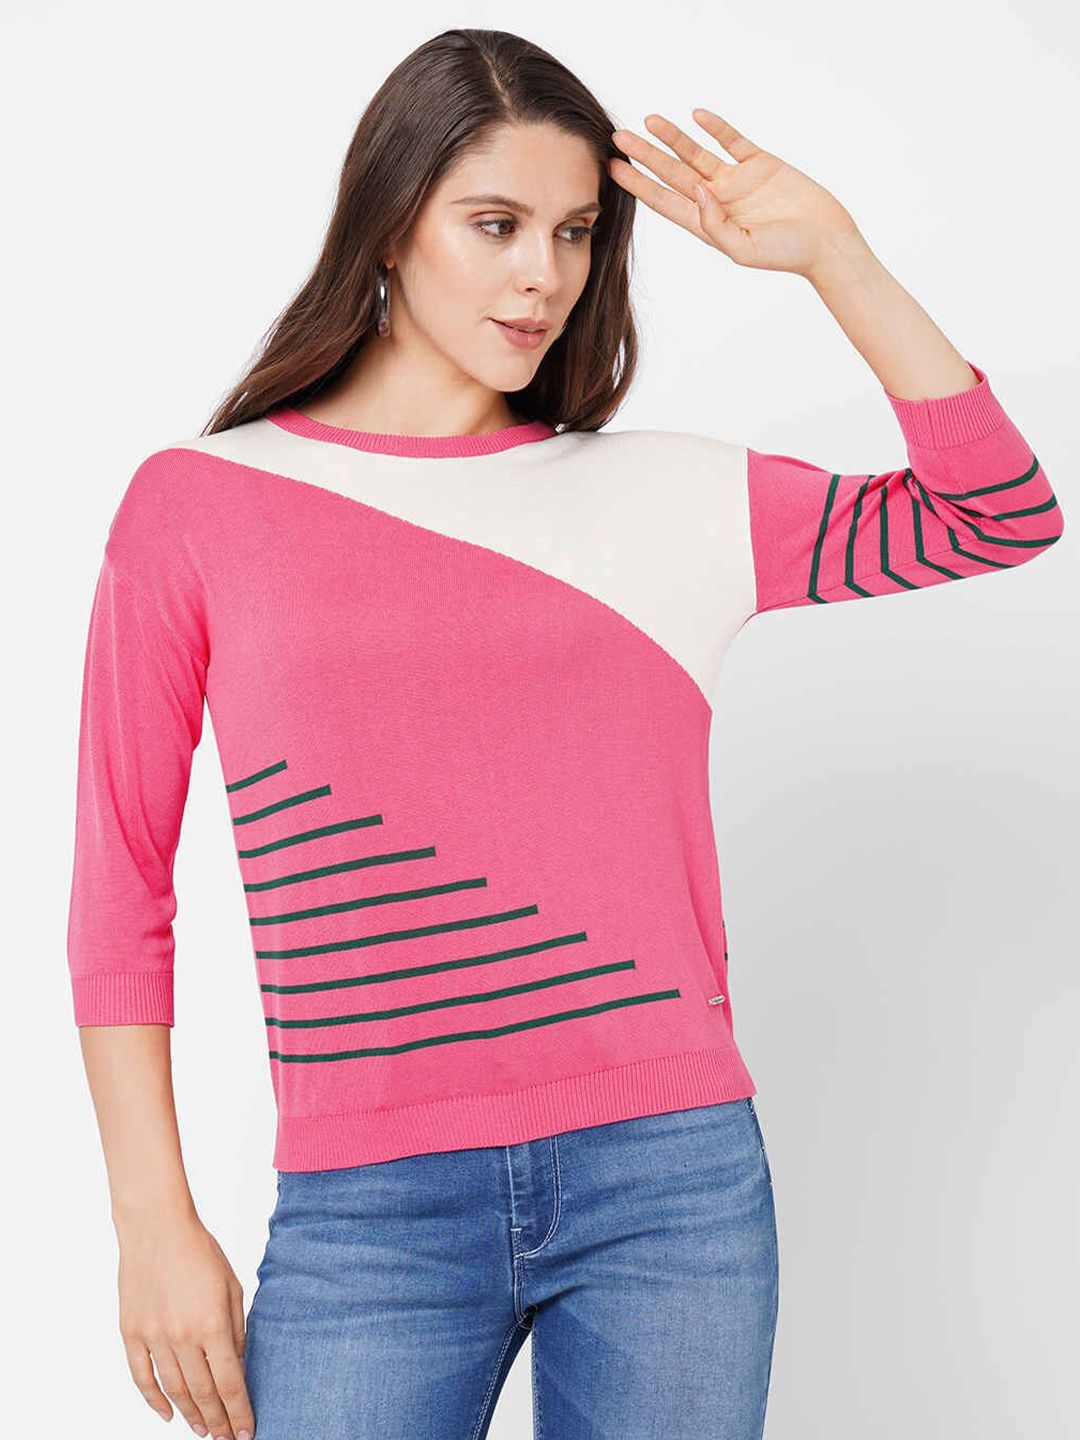 Pepe Jeans Women Pink & White Colourblocked Top Price in India